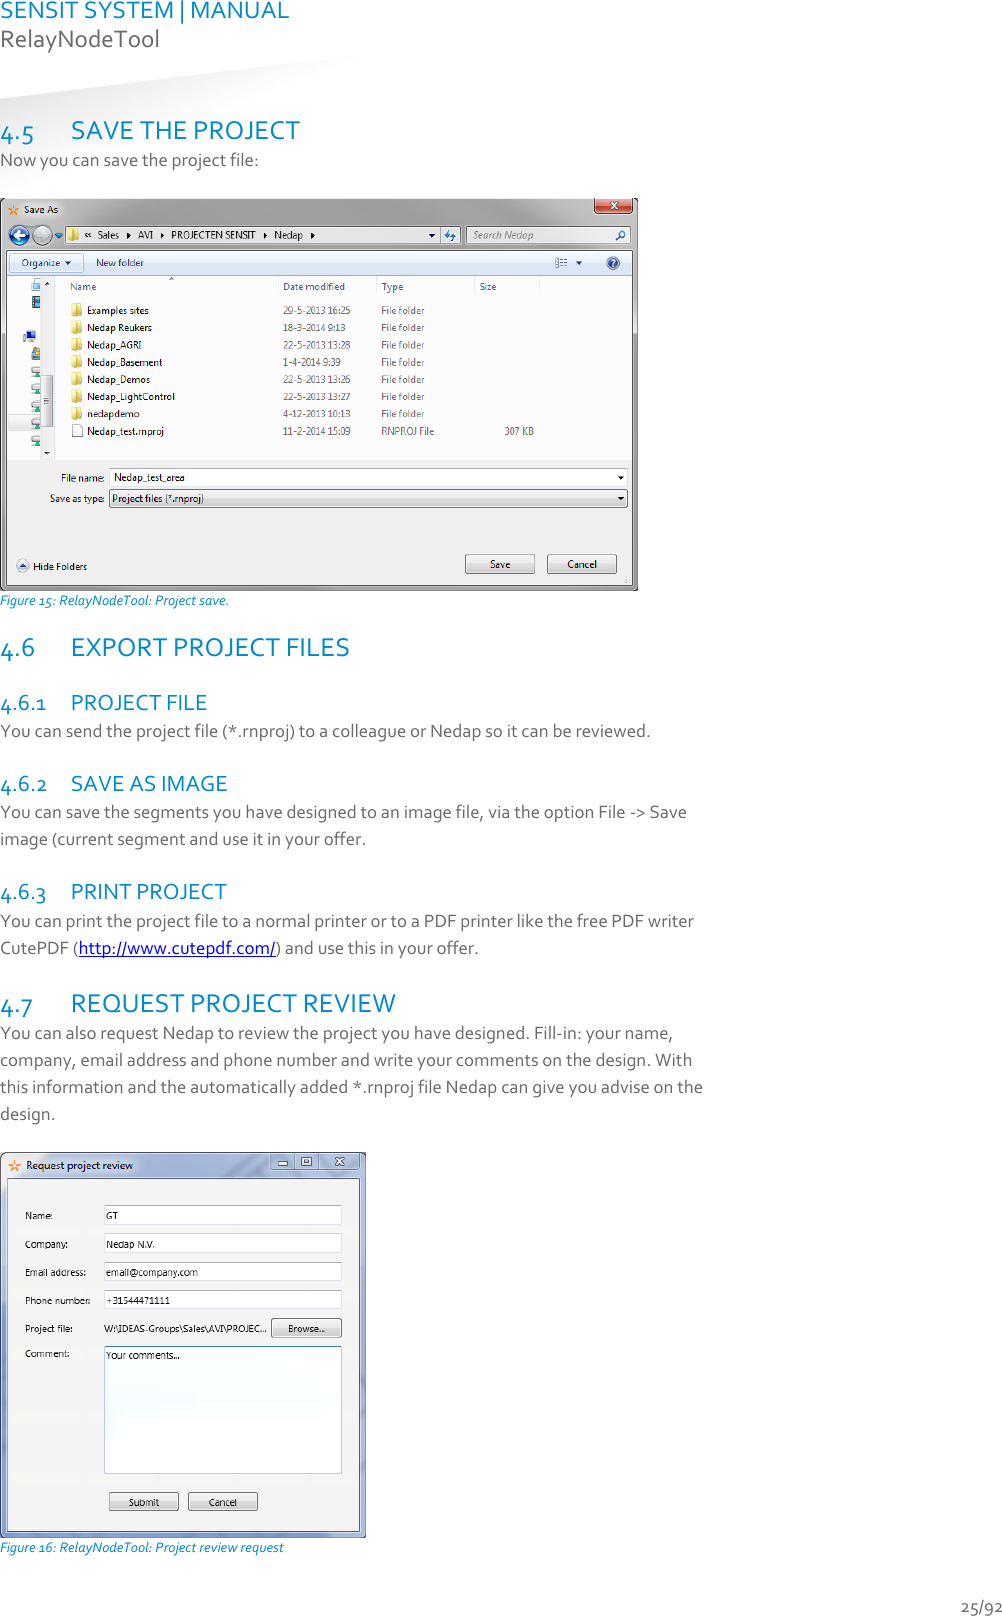 SENSIT SYSTEM | MANUAL RelayNodeTool  25/92 4.5 SAVE THE PROJECT Now you can save the project file:   Figure 15: RelayNodeTool: Project save. 4.6 EXPORT PROJECT FILES  4.6.1 PROJECT FILE You can send the project file (*.rnproj) to a colleague or Nedap so it can be reviewed.  4.6.2 SAVE AS IMAGE You can save the segments you have designed to an image file, via the option File -&gt; Save image (current segment and use it in your offer.  4.6.3 PRINT PROJECT  You can print the project file to a normal printer or to a PDF printer like the free PDF writer CutePDF (http://www.cutepdf.com/) and use this in your offer.   4.7 REQUEST PROJECT REVIEW You can also request Nedap to review the project you have designed. Fill-in: your name, company, email address and phone number and write your comments on the design. With this information and the automatically added *.rnproj file Nedap can give you advise on the design.   Figure 16: RelayNodeTool: Project review request 